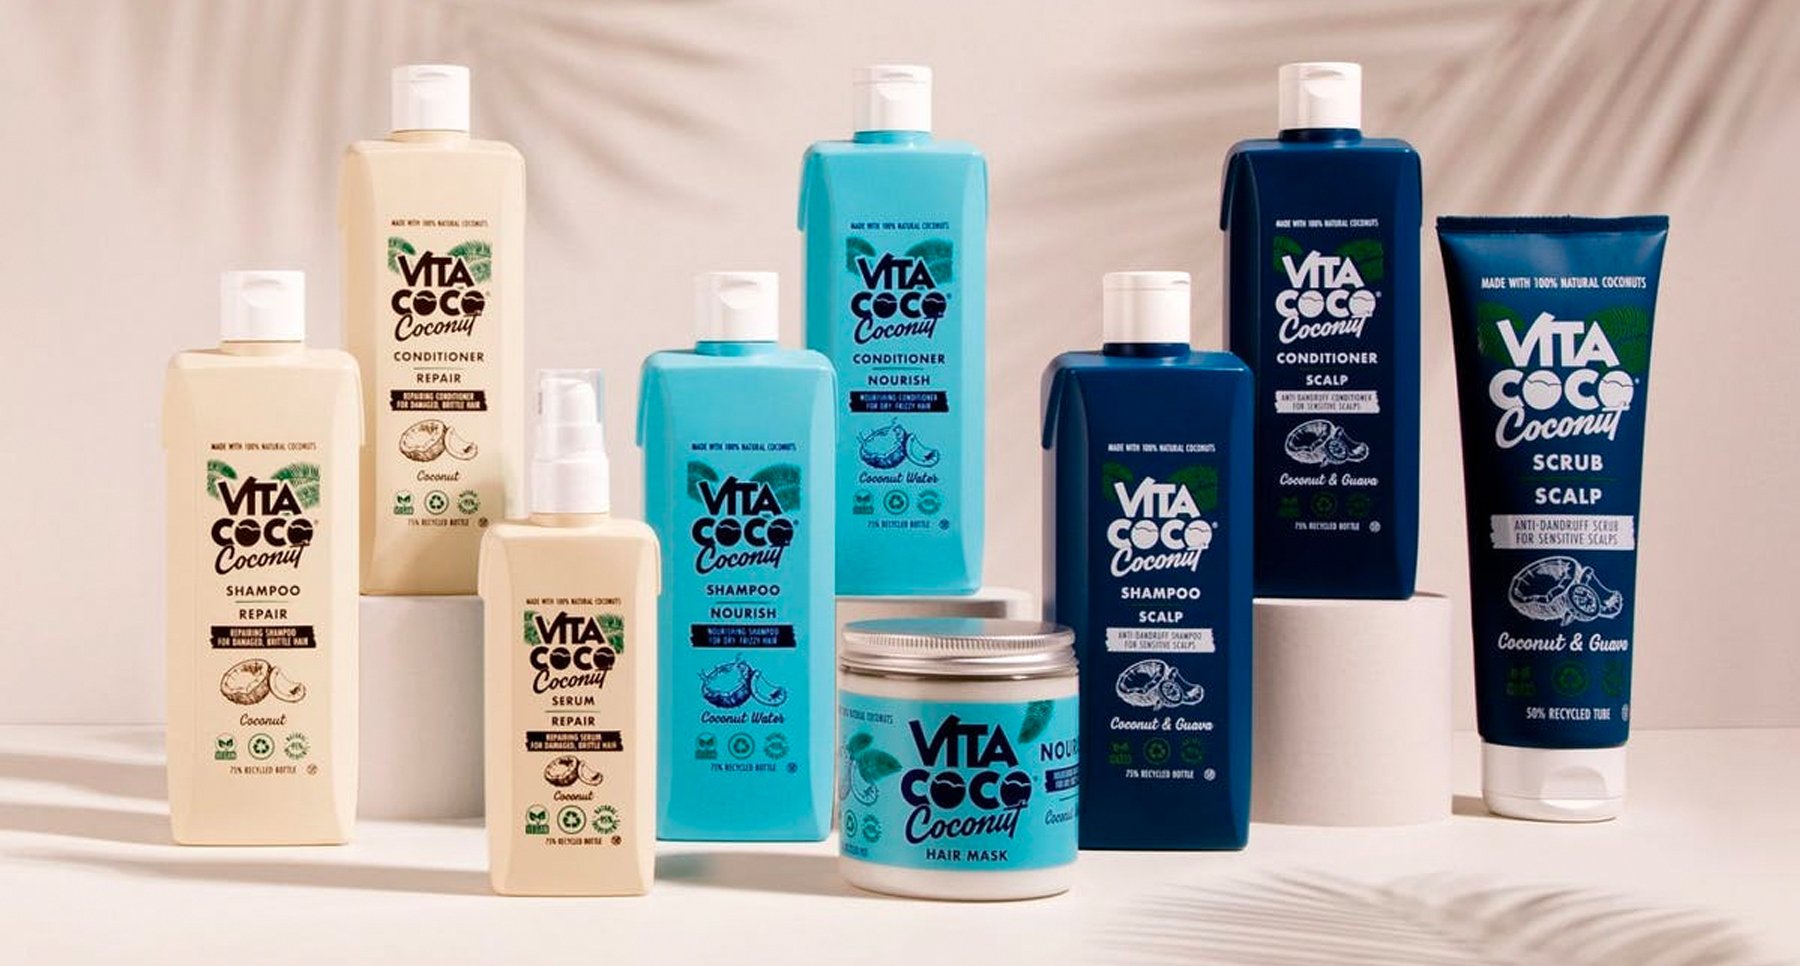 Advertisement for brand Vita Coco's new haircare product launch